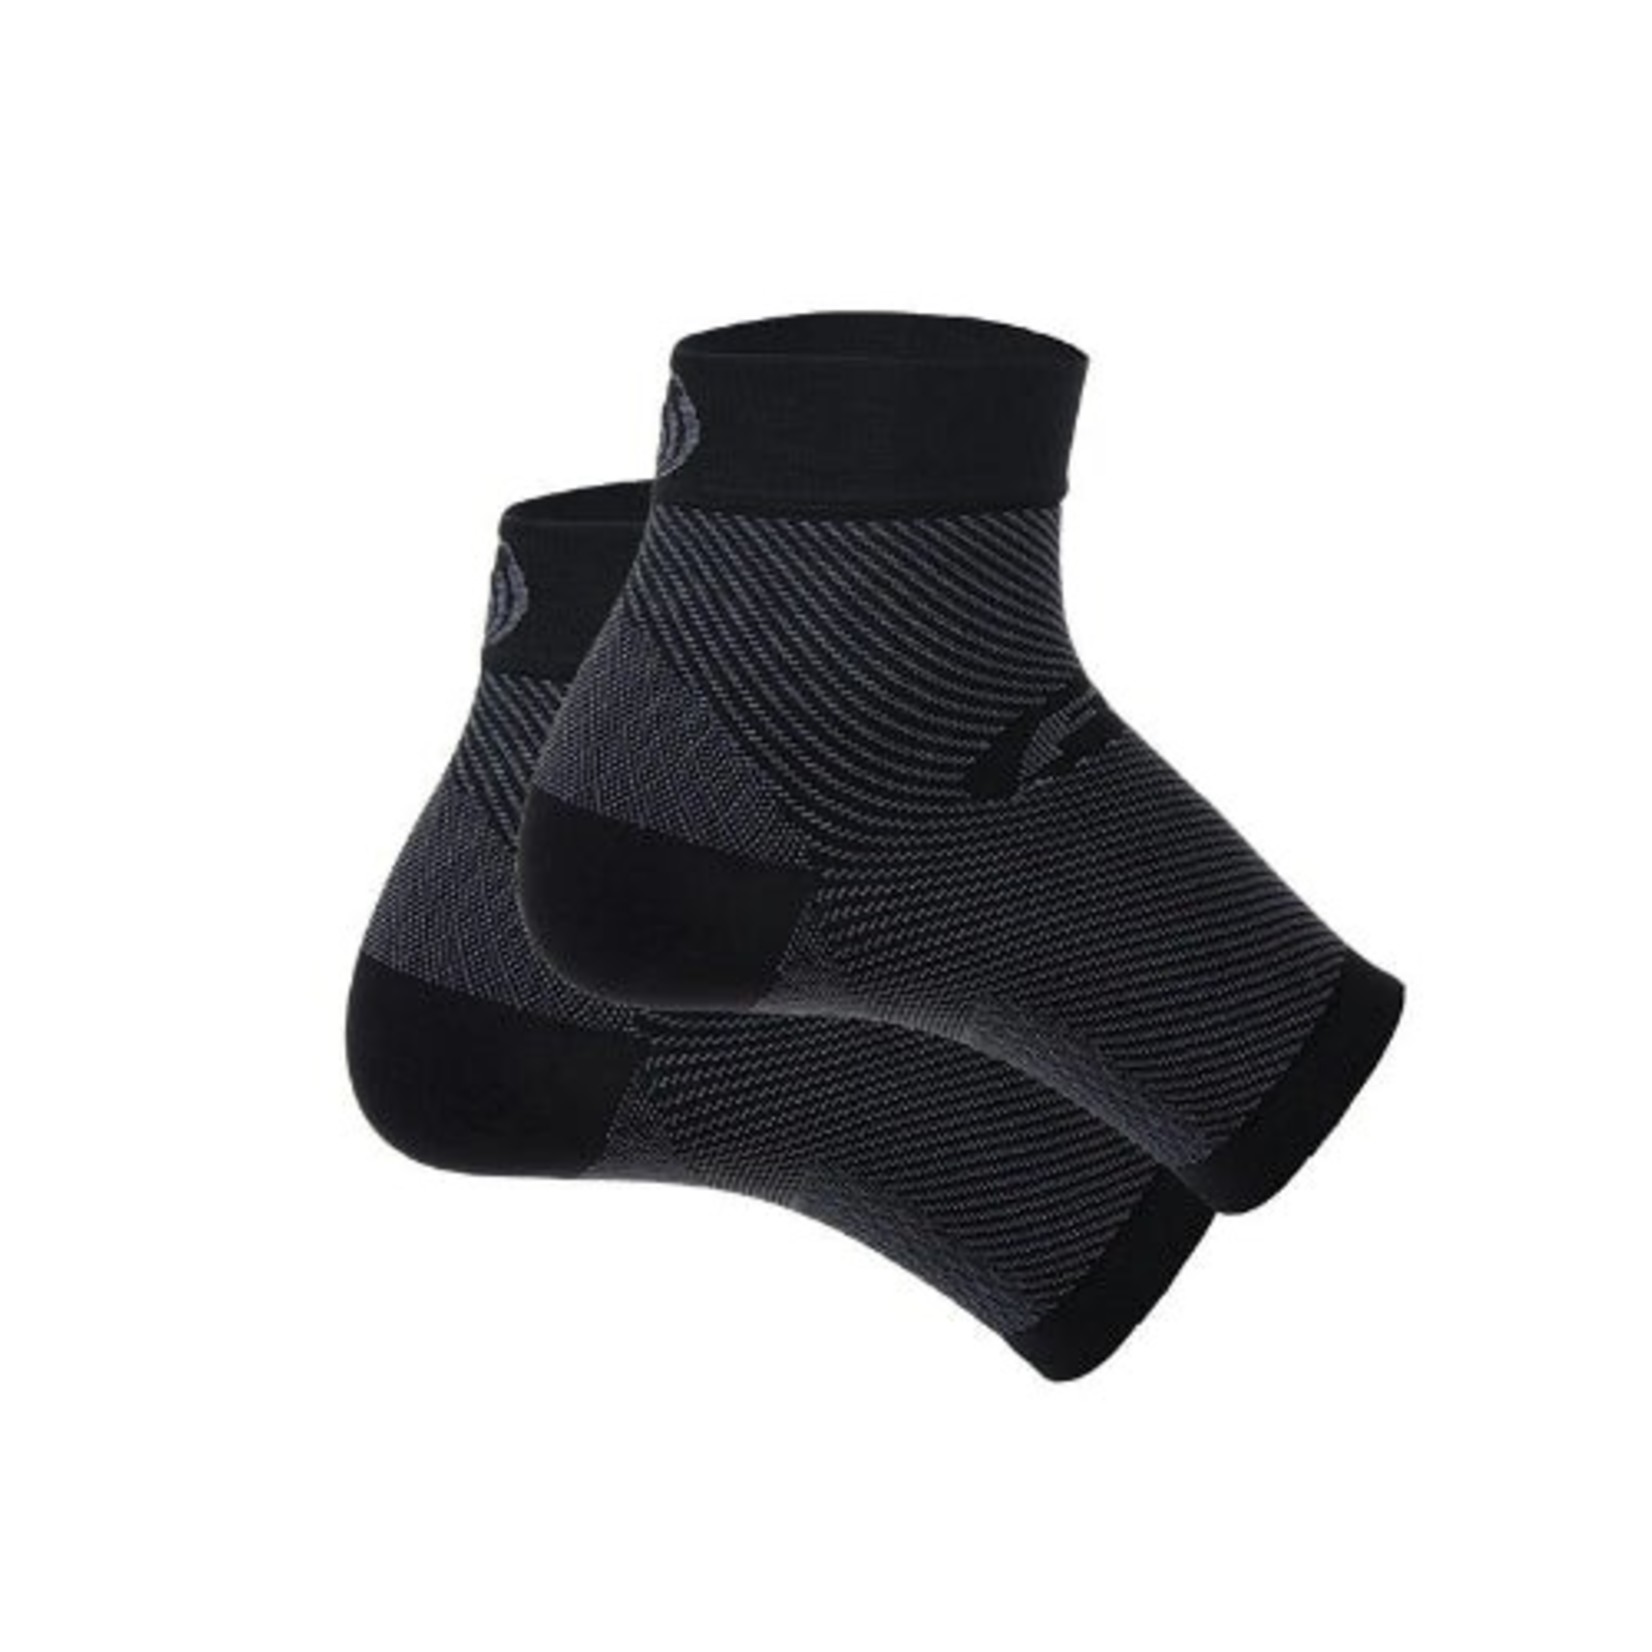 OS1st OS1ST PERF FOOT SLEEVE BLACK